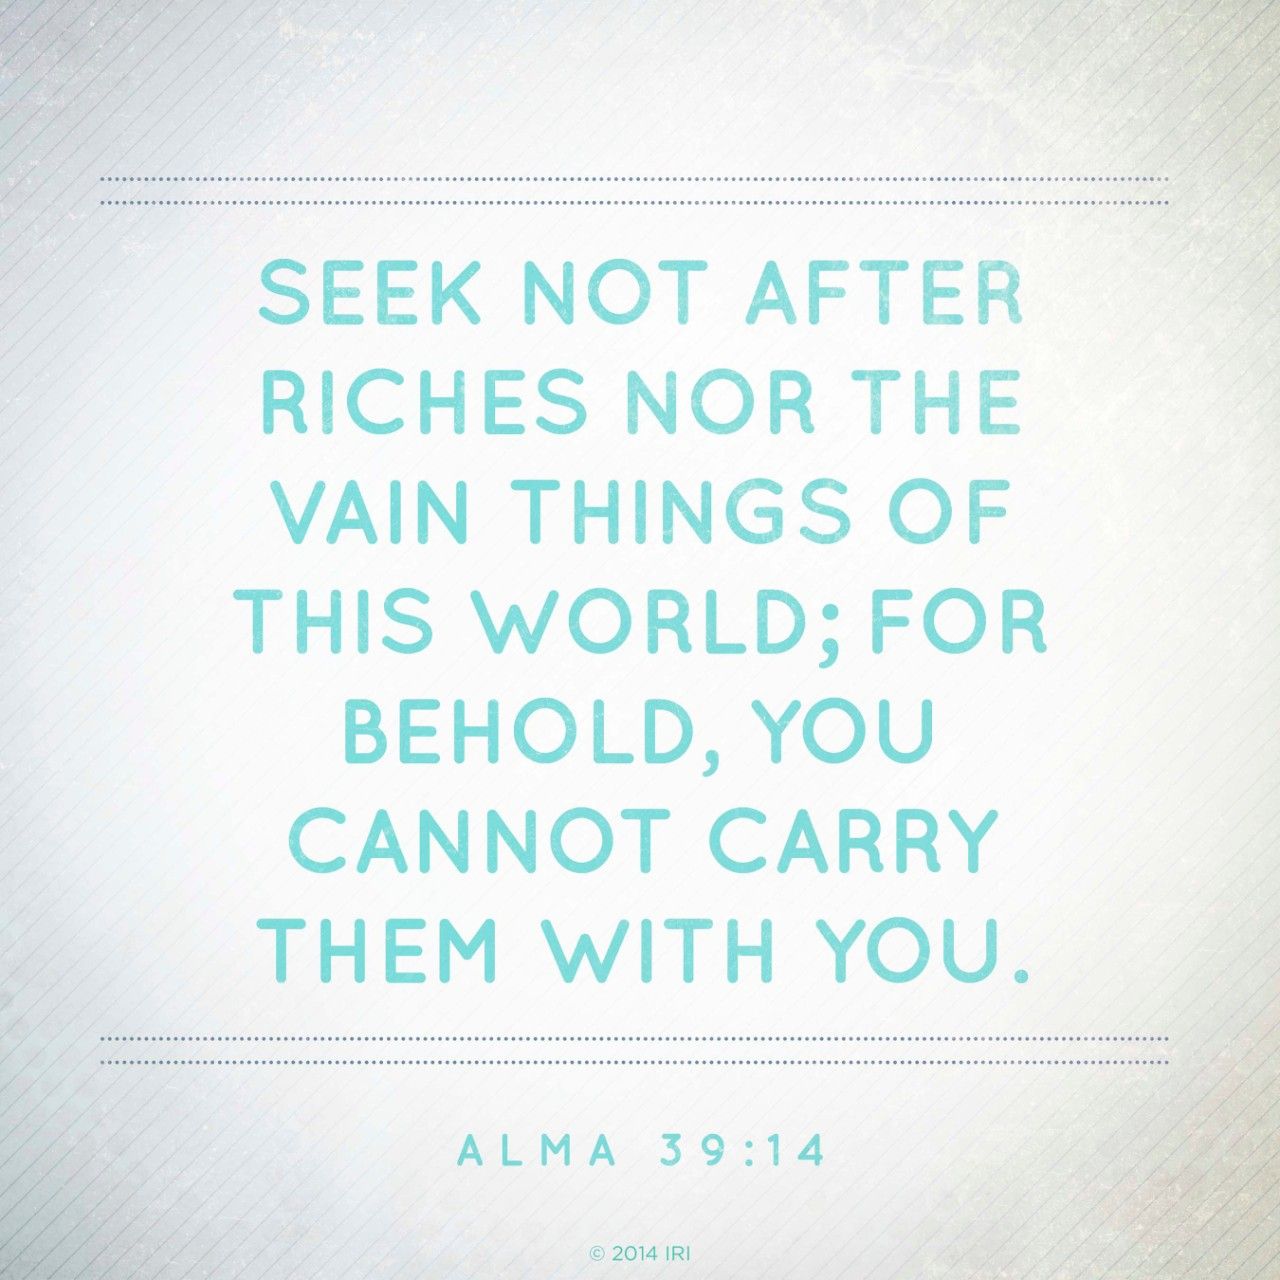 “Seek not after riches nor the vain things of this world; for behold, you cannot carry them with you.”—Alma 39:14